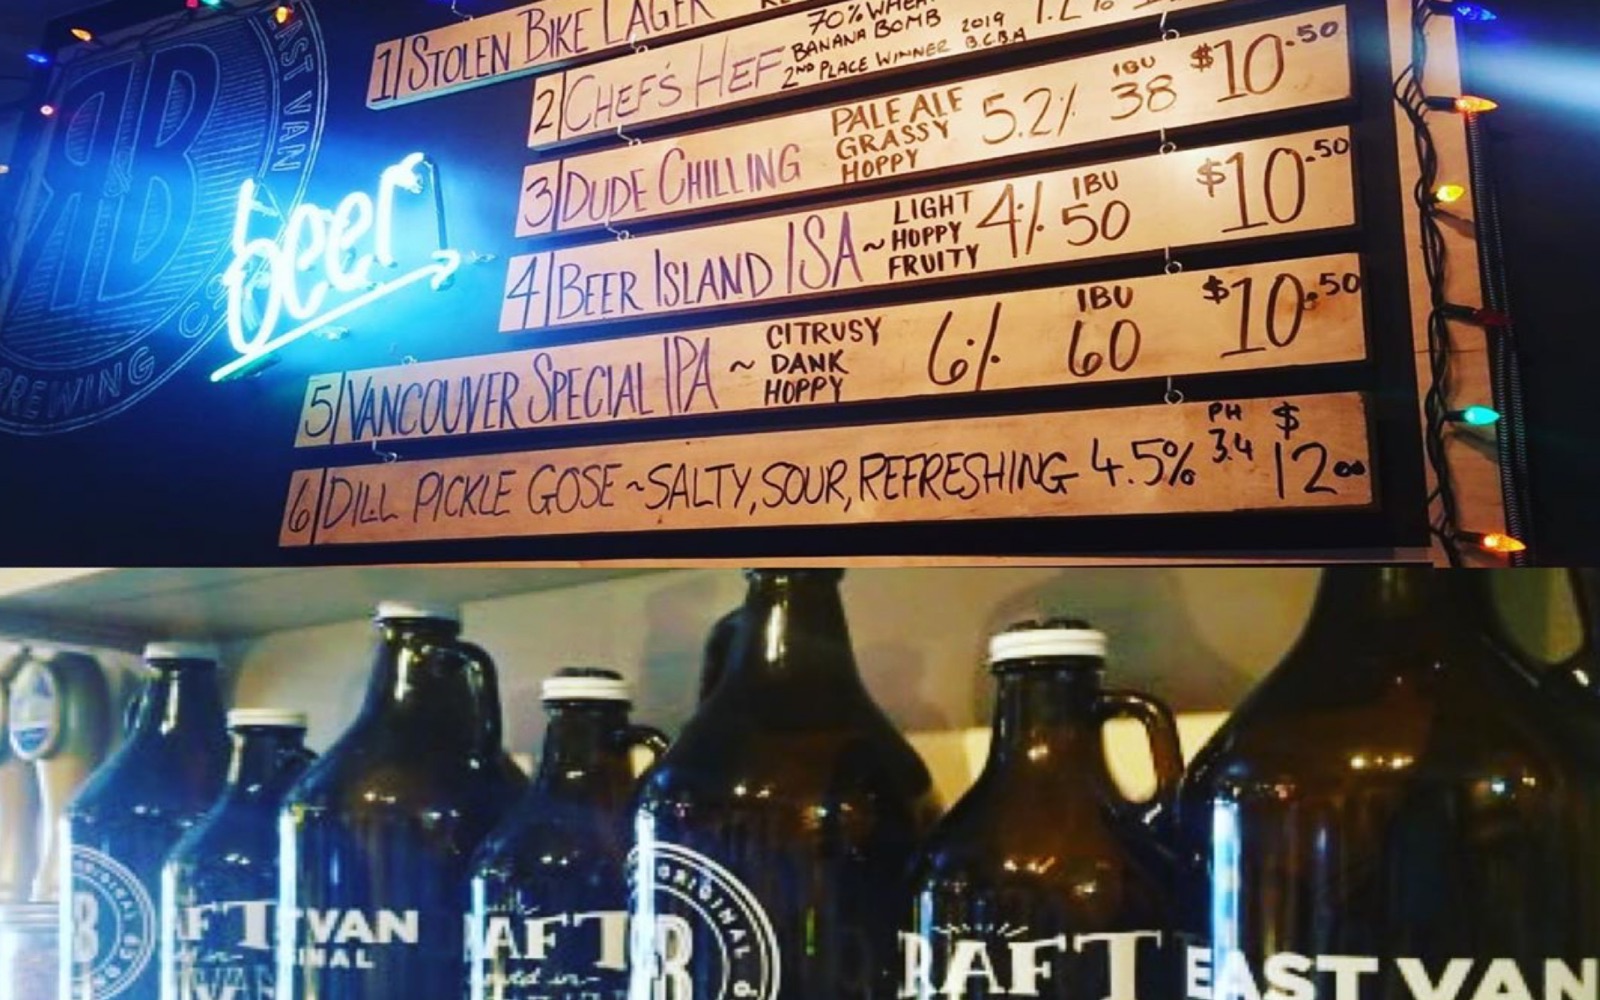 A bunch of growlers sit on the bar at R & B Brewing, Vancouver